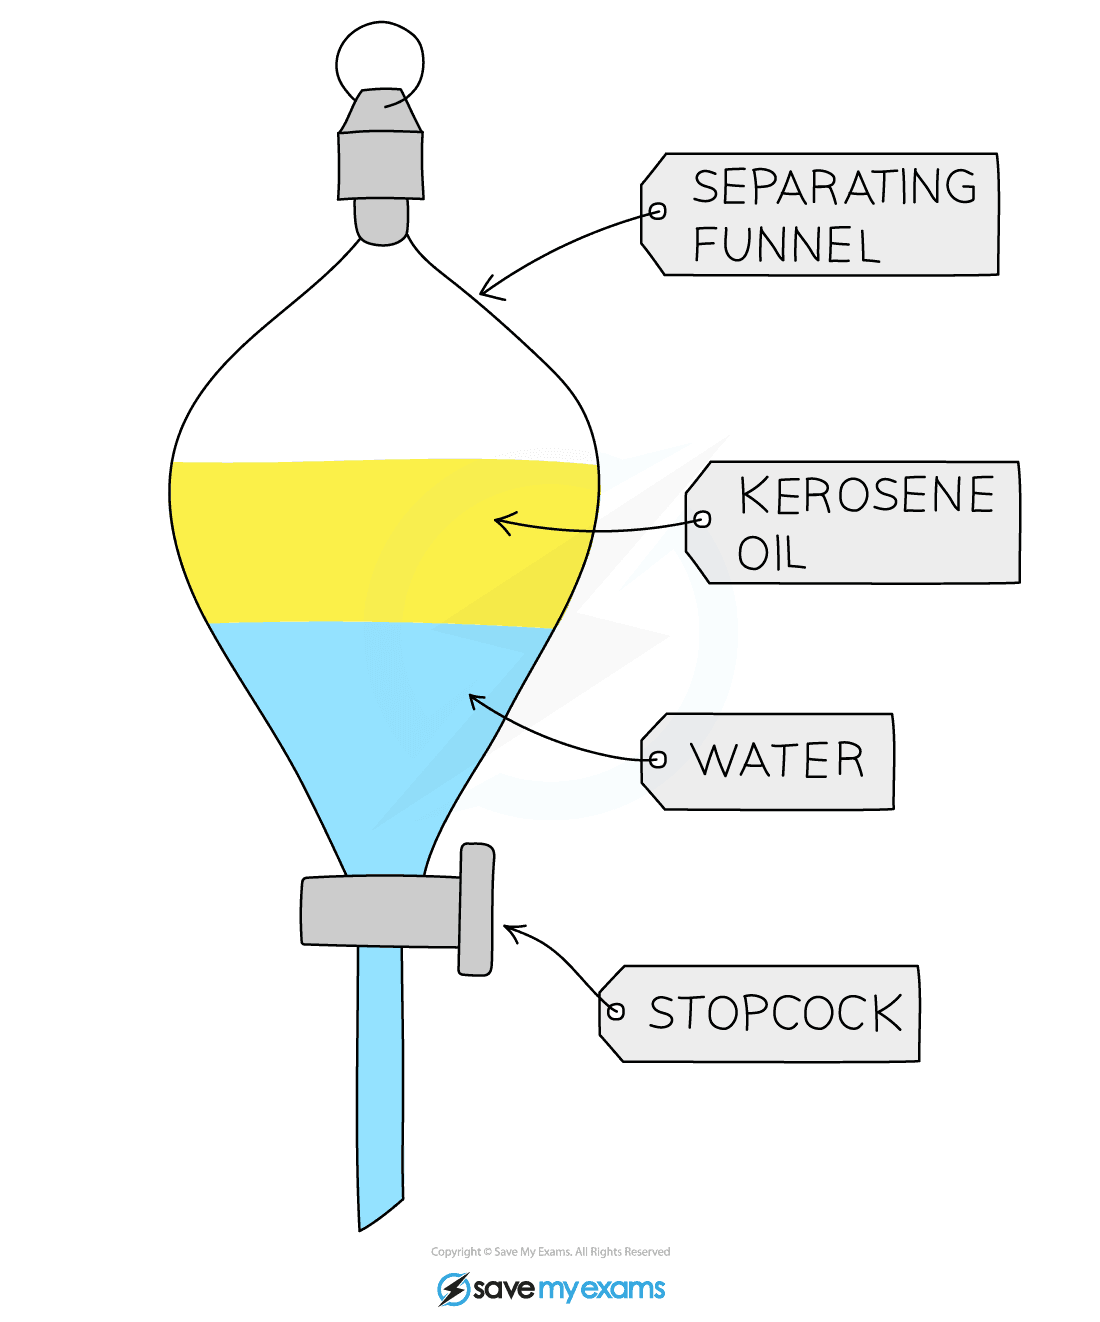 Separating funnel used to separate kerosene & water, IGCSE & GCSE Chemistry revision notes